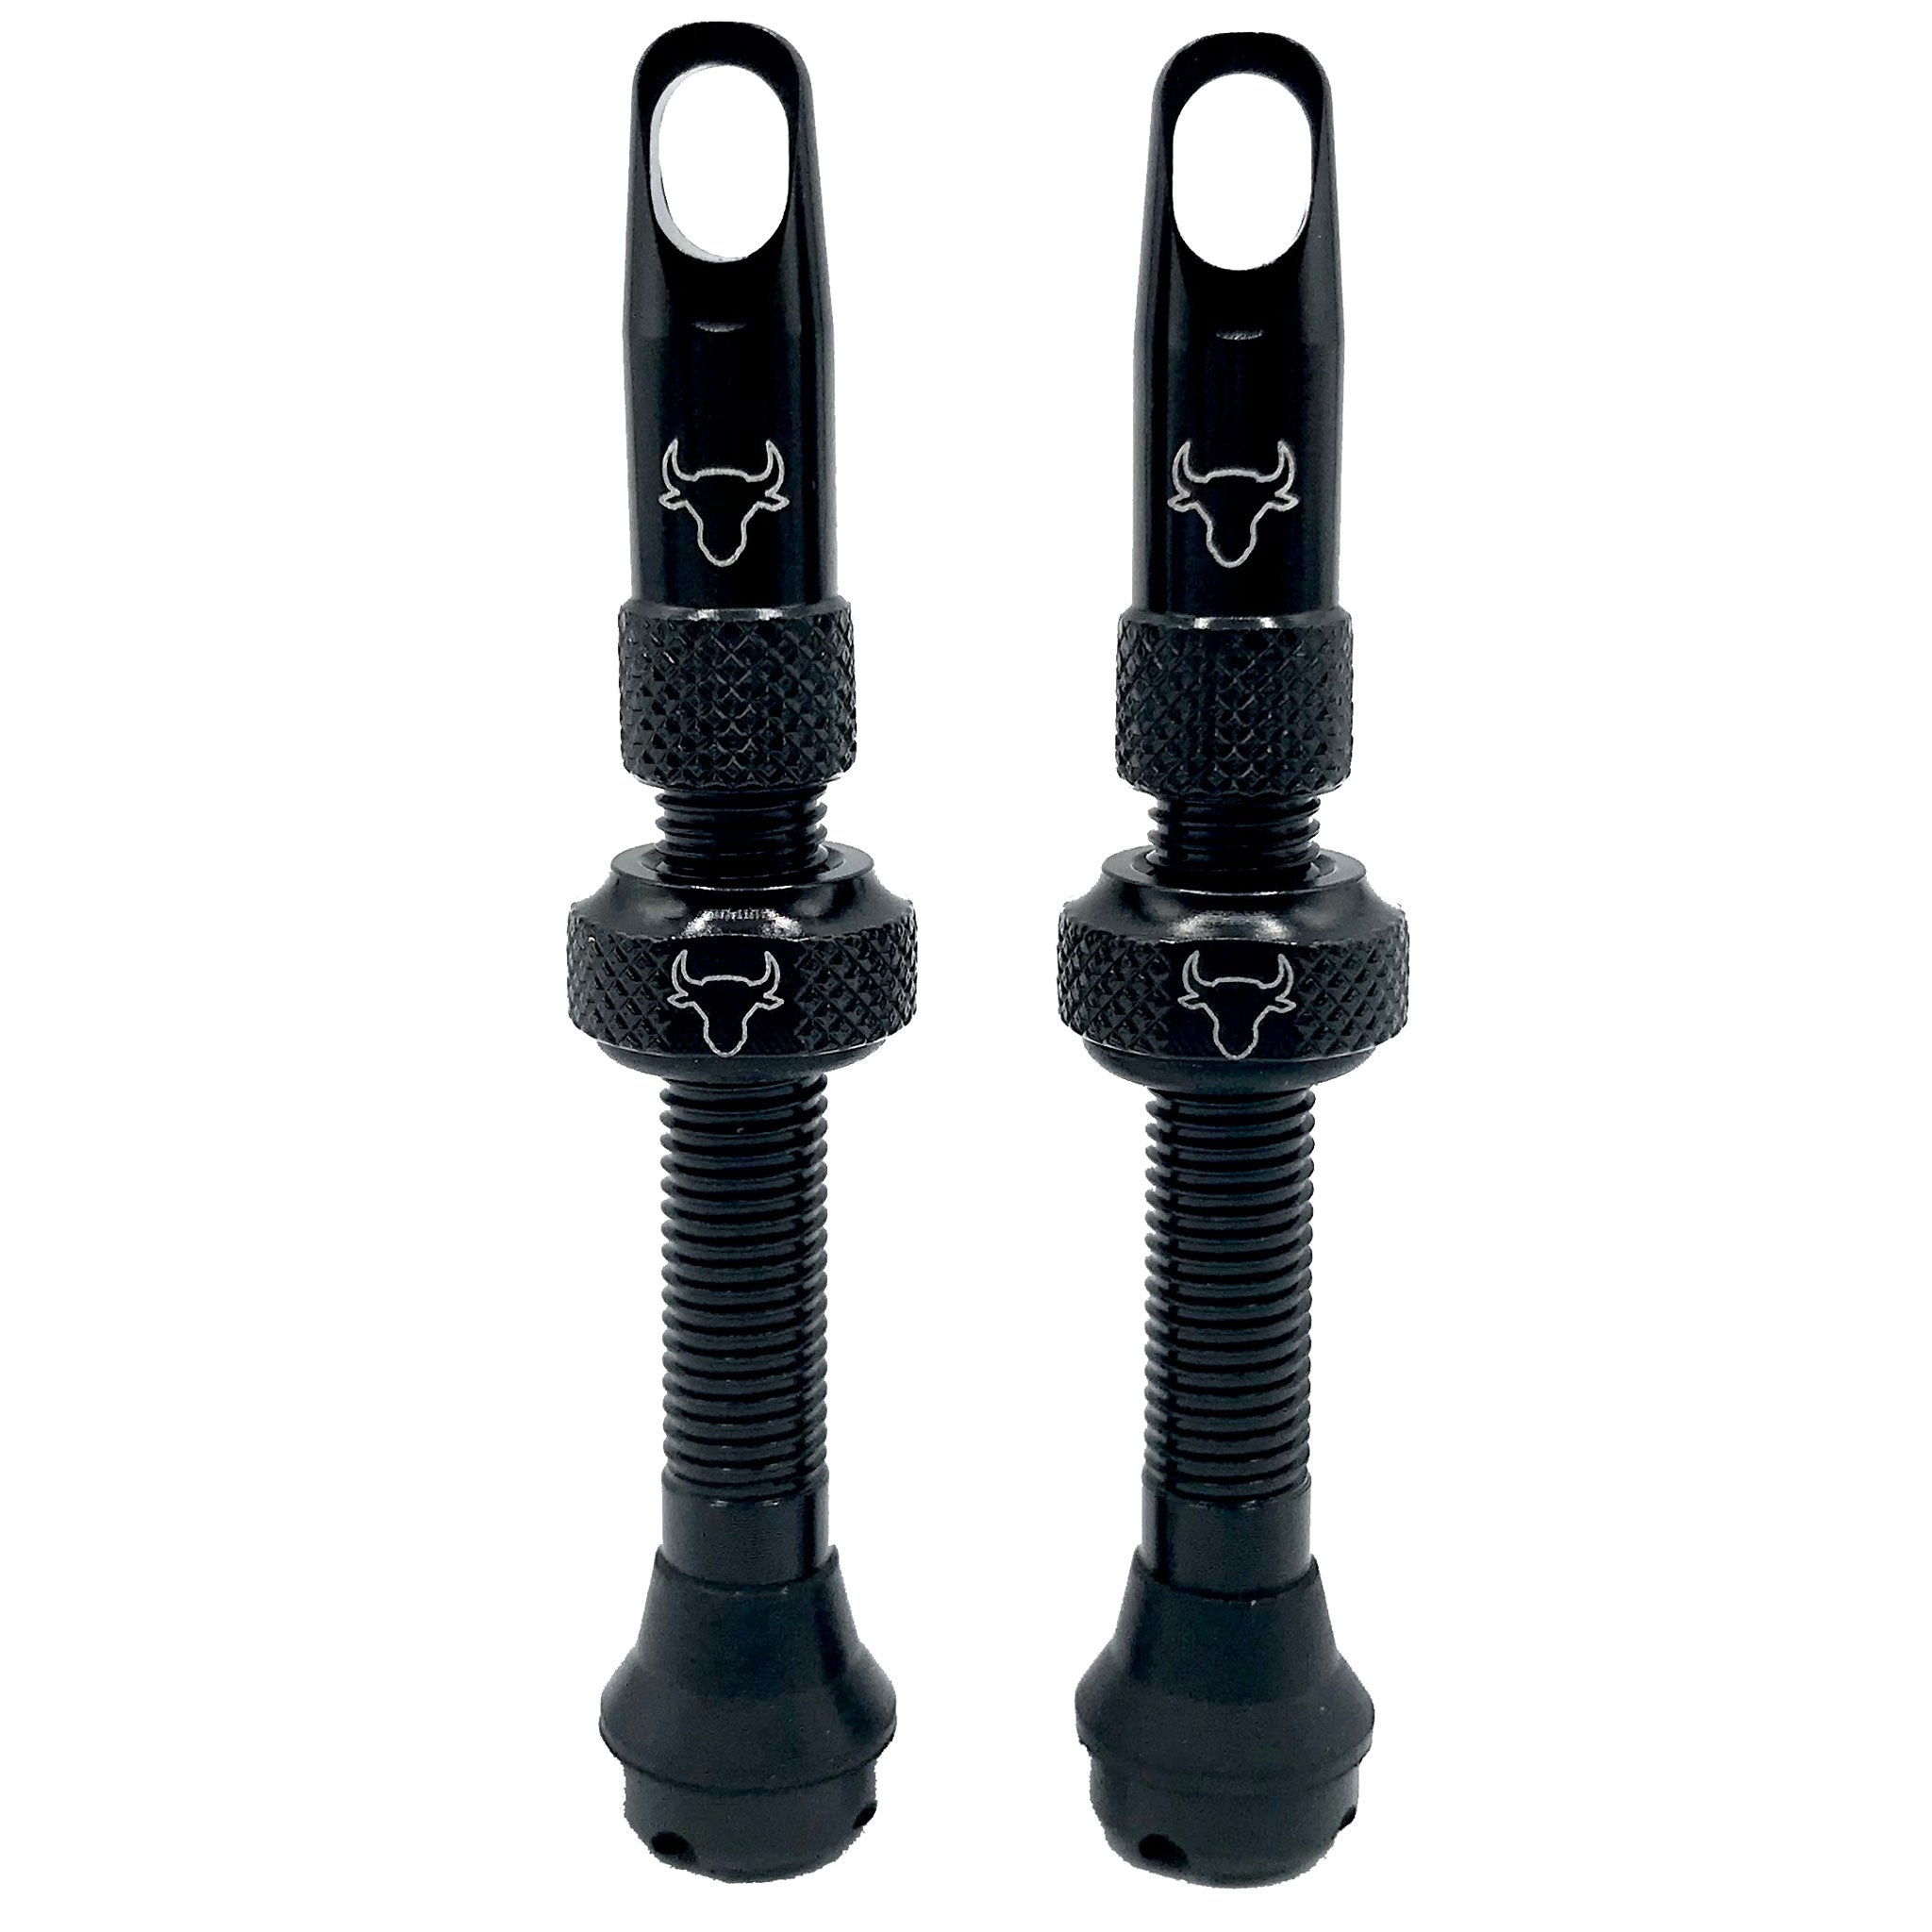 Hold Fast Cycling Tubeless Valve Stem 42mm (Pair) - Black